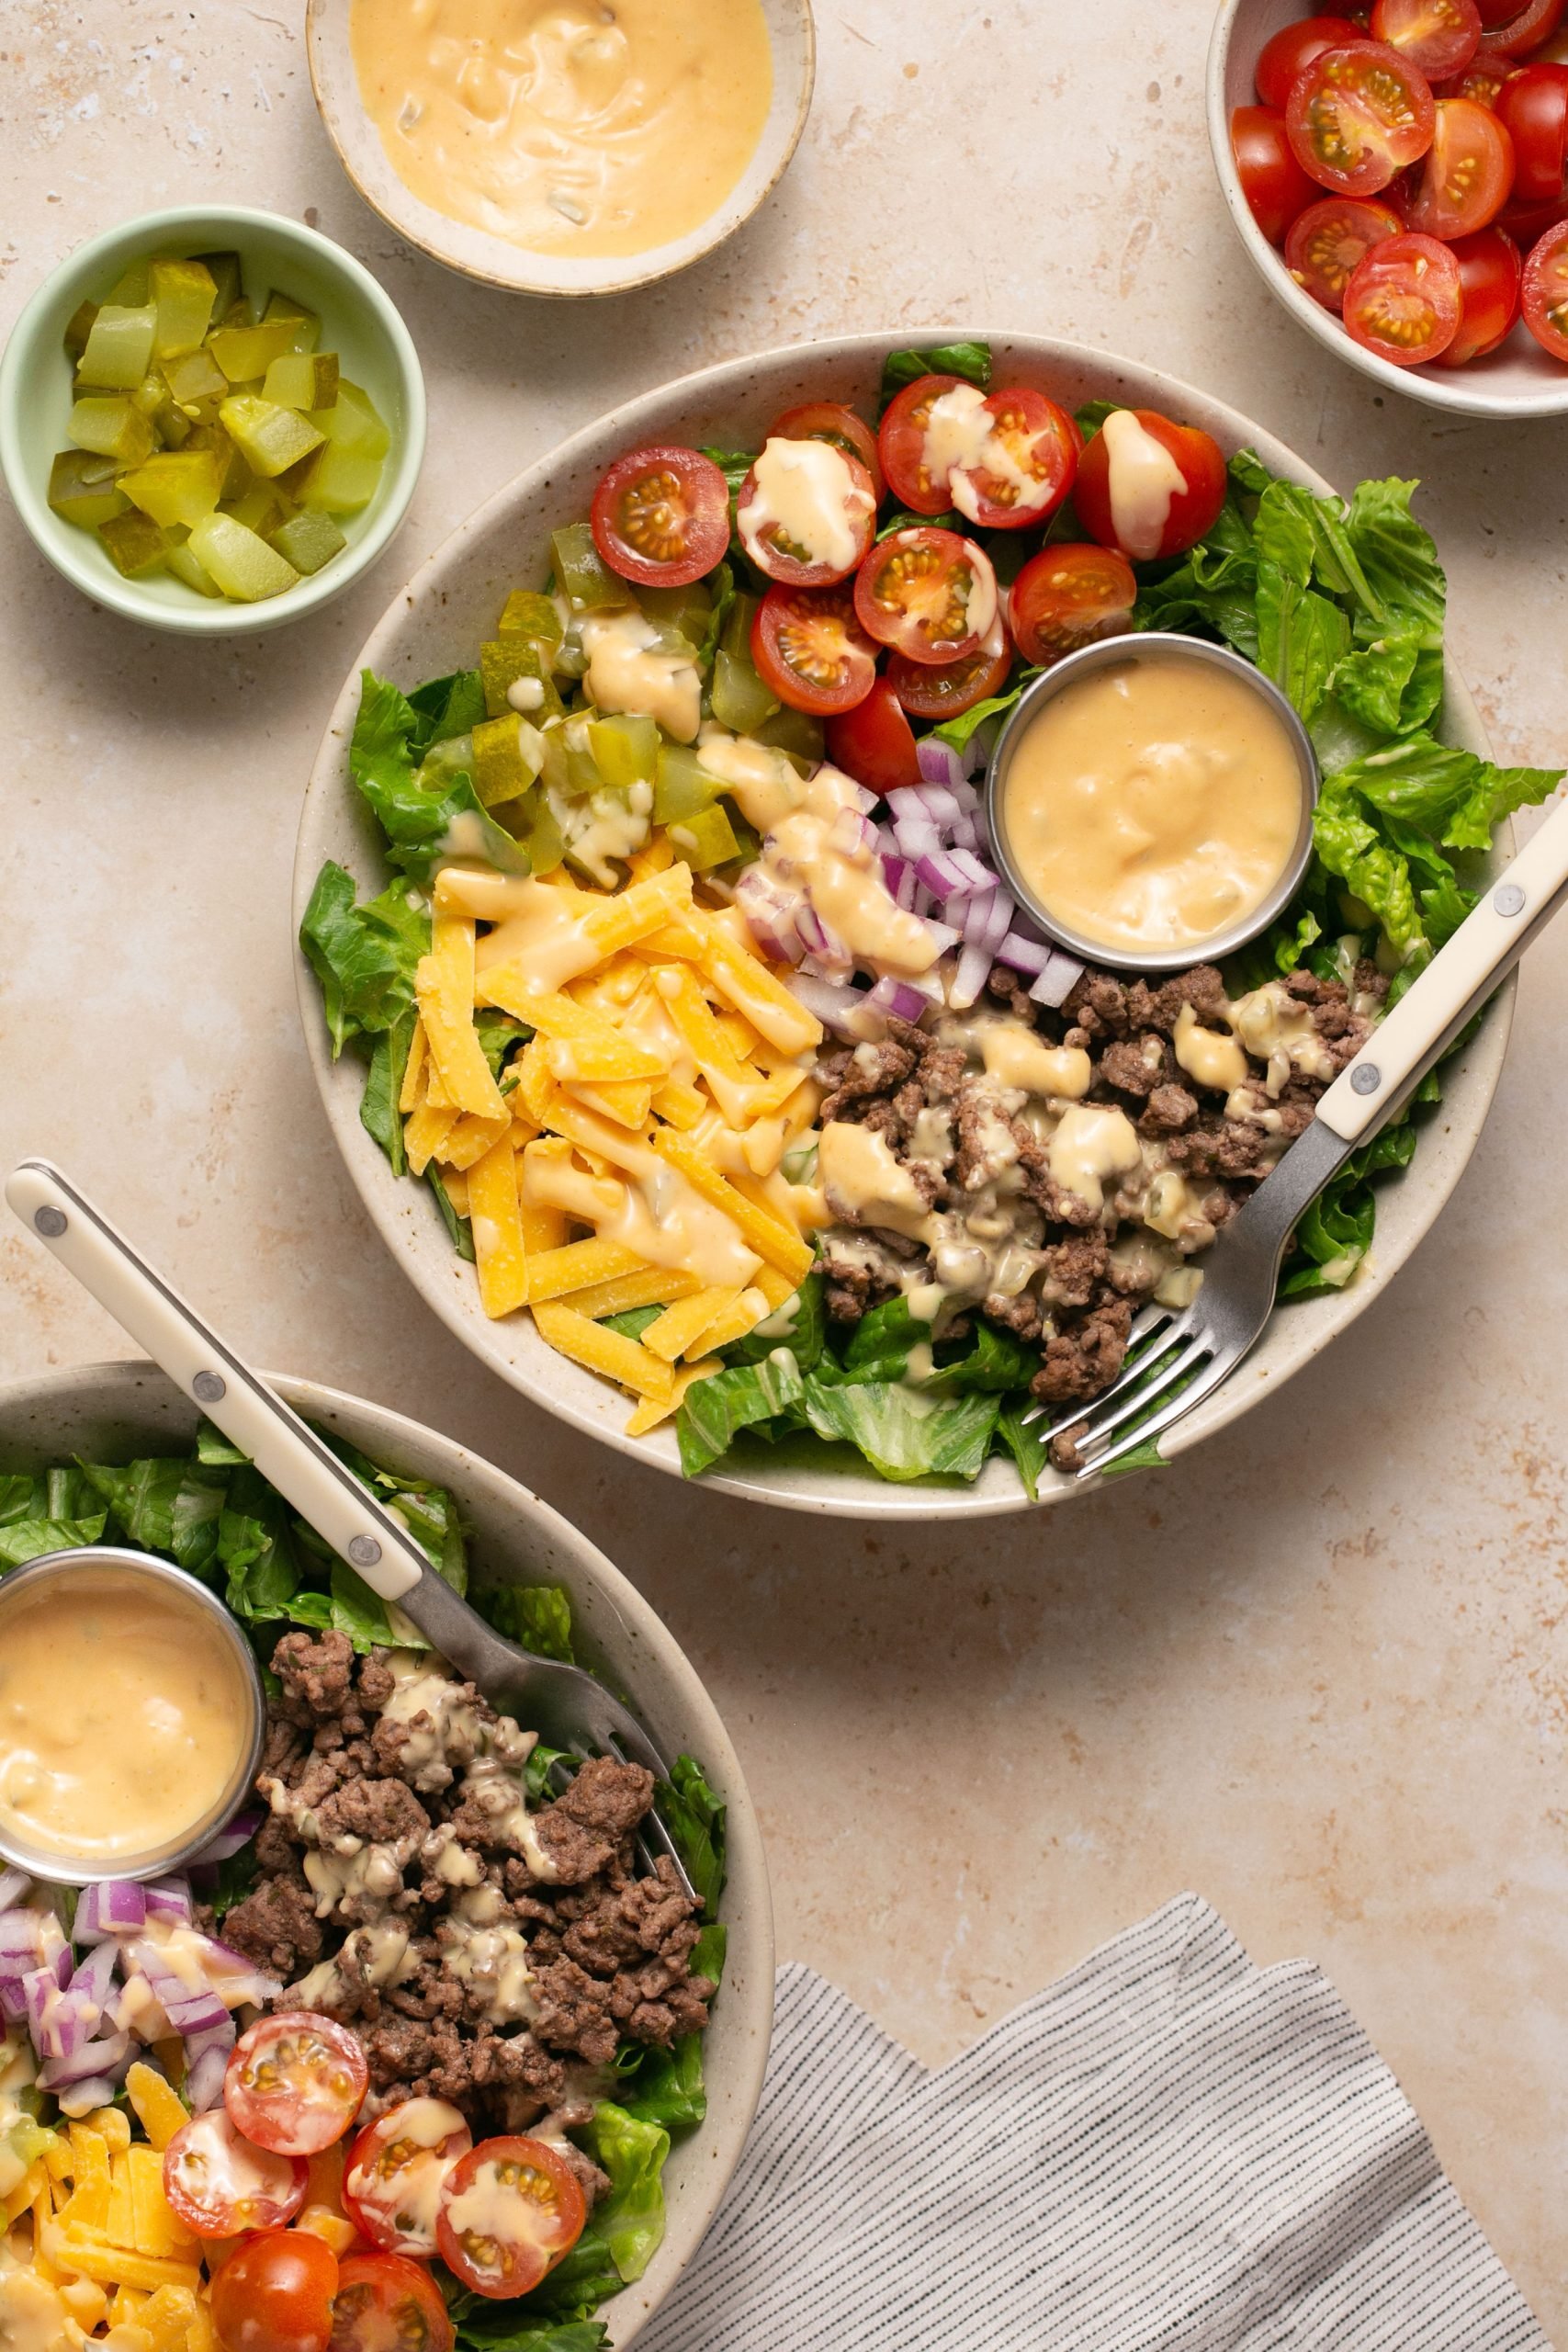 Cheeseburger salads assembled in two bowls on a table with a stripped napkin and two forks. There are small bowls of ingredients on the table too.